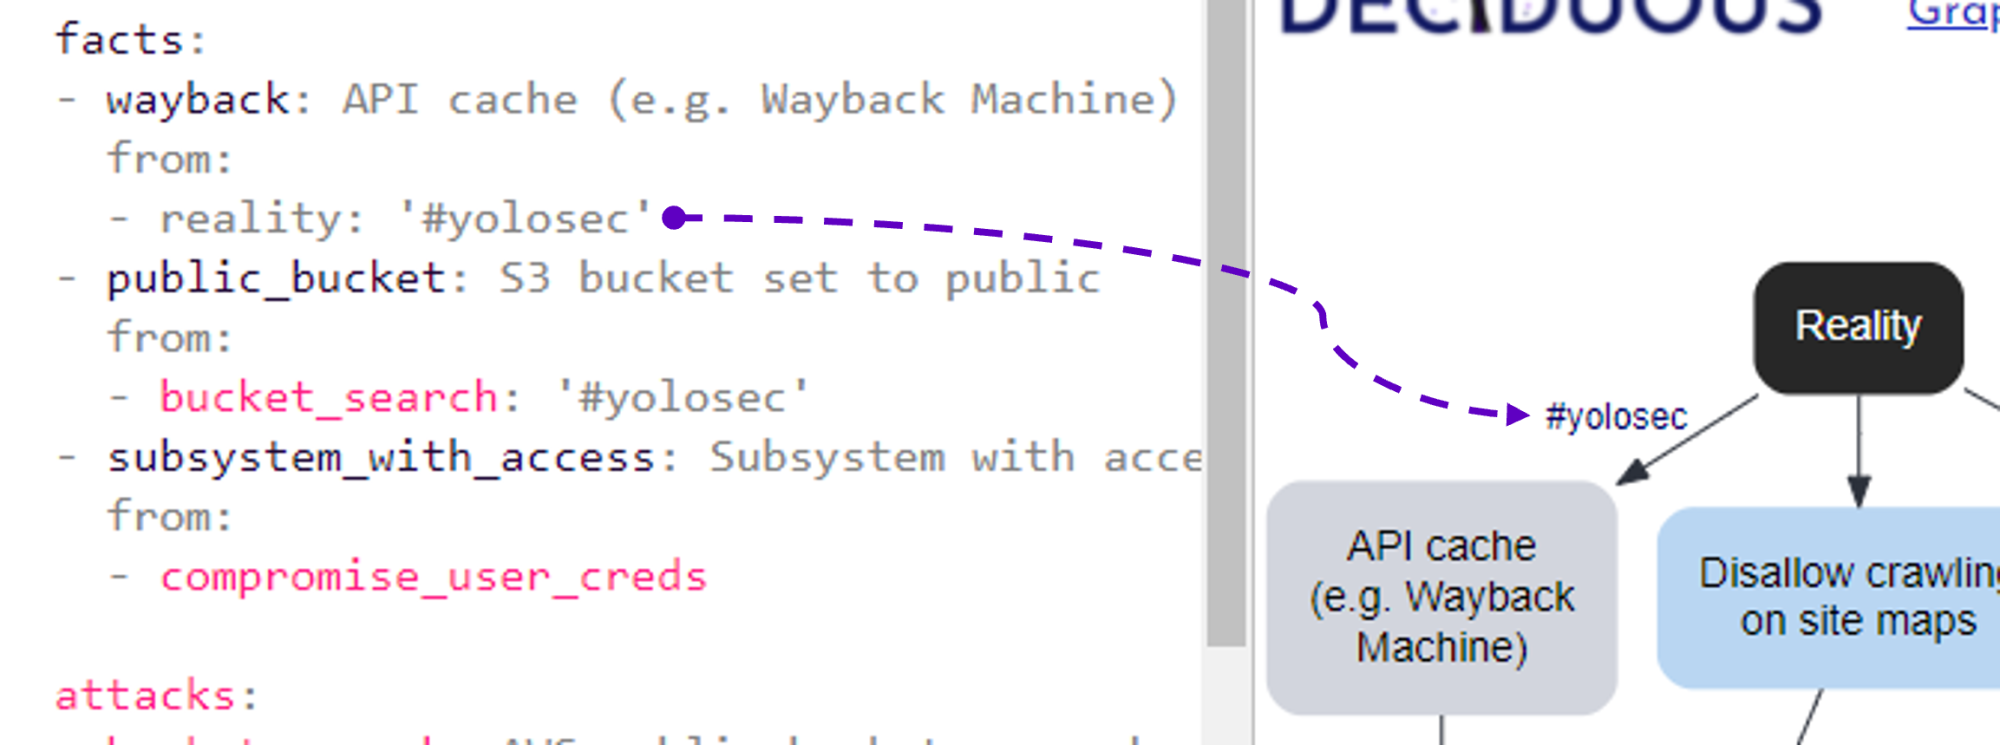 A screenshot showing how typing a &ldquo;#yolosec&rdquo; label manifests in the graph. The label #yolosec appears next to the arrow pointing from the &ldquo;Reality&rdquo; node to the &ldquo;API cache Wayback Machine&rdquo; node.